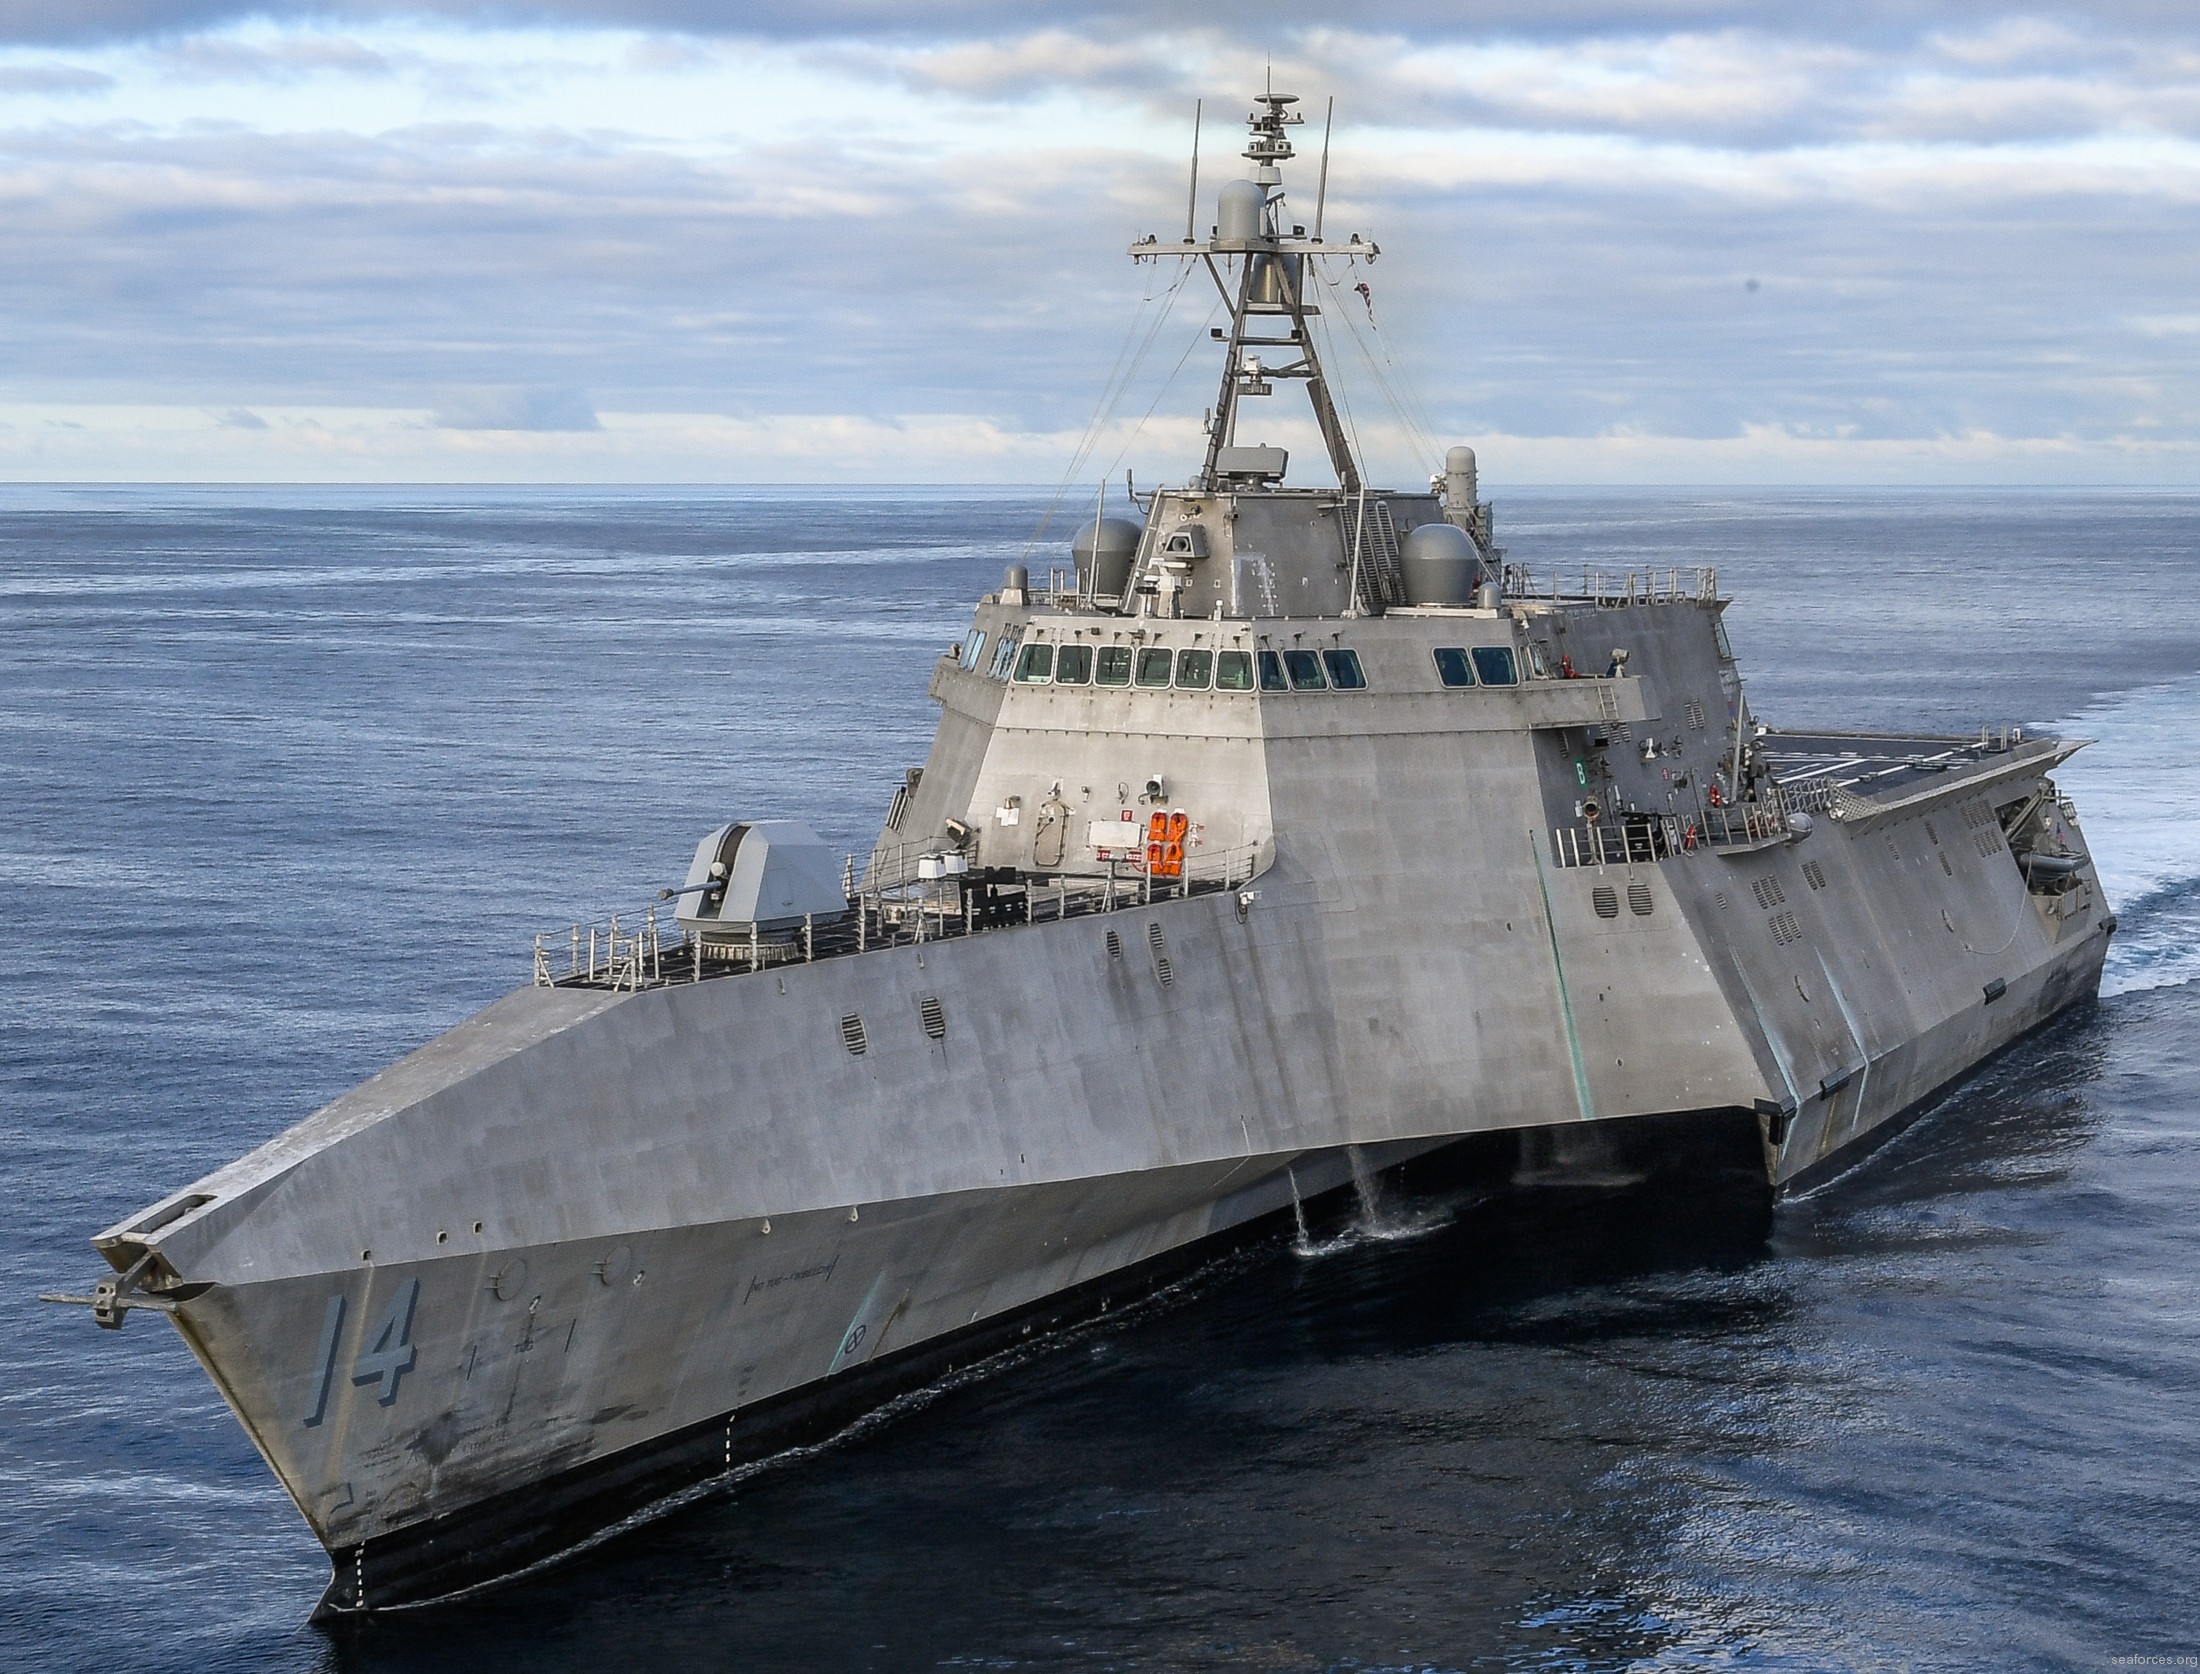 lcs-14 uss manchester littoral combat ship independence class us navy 14